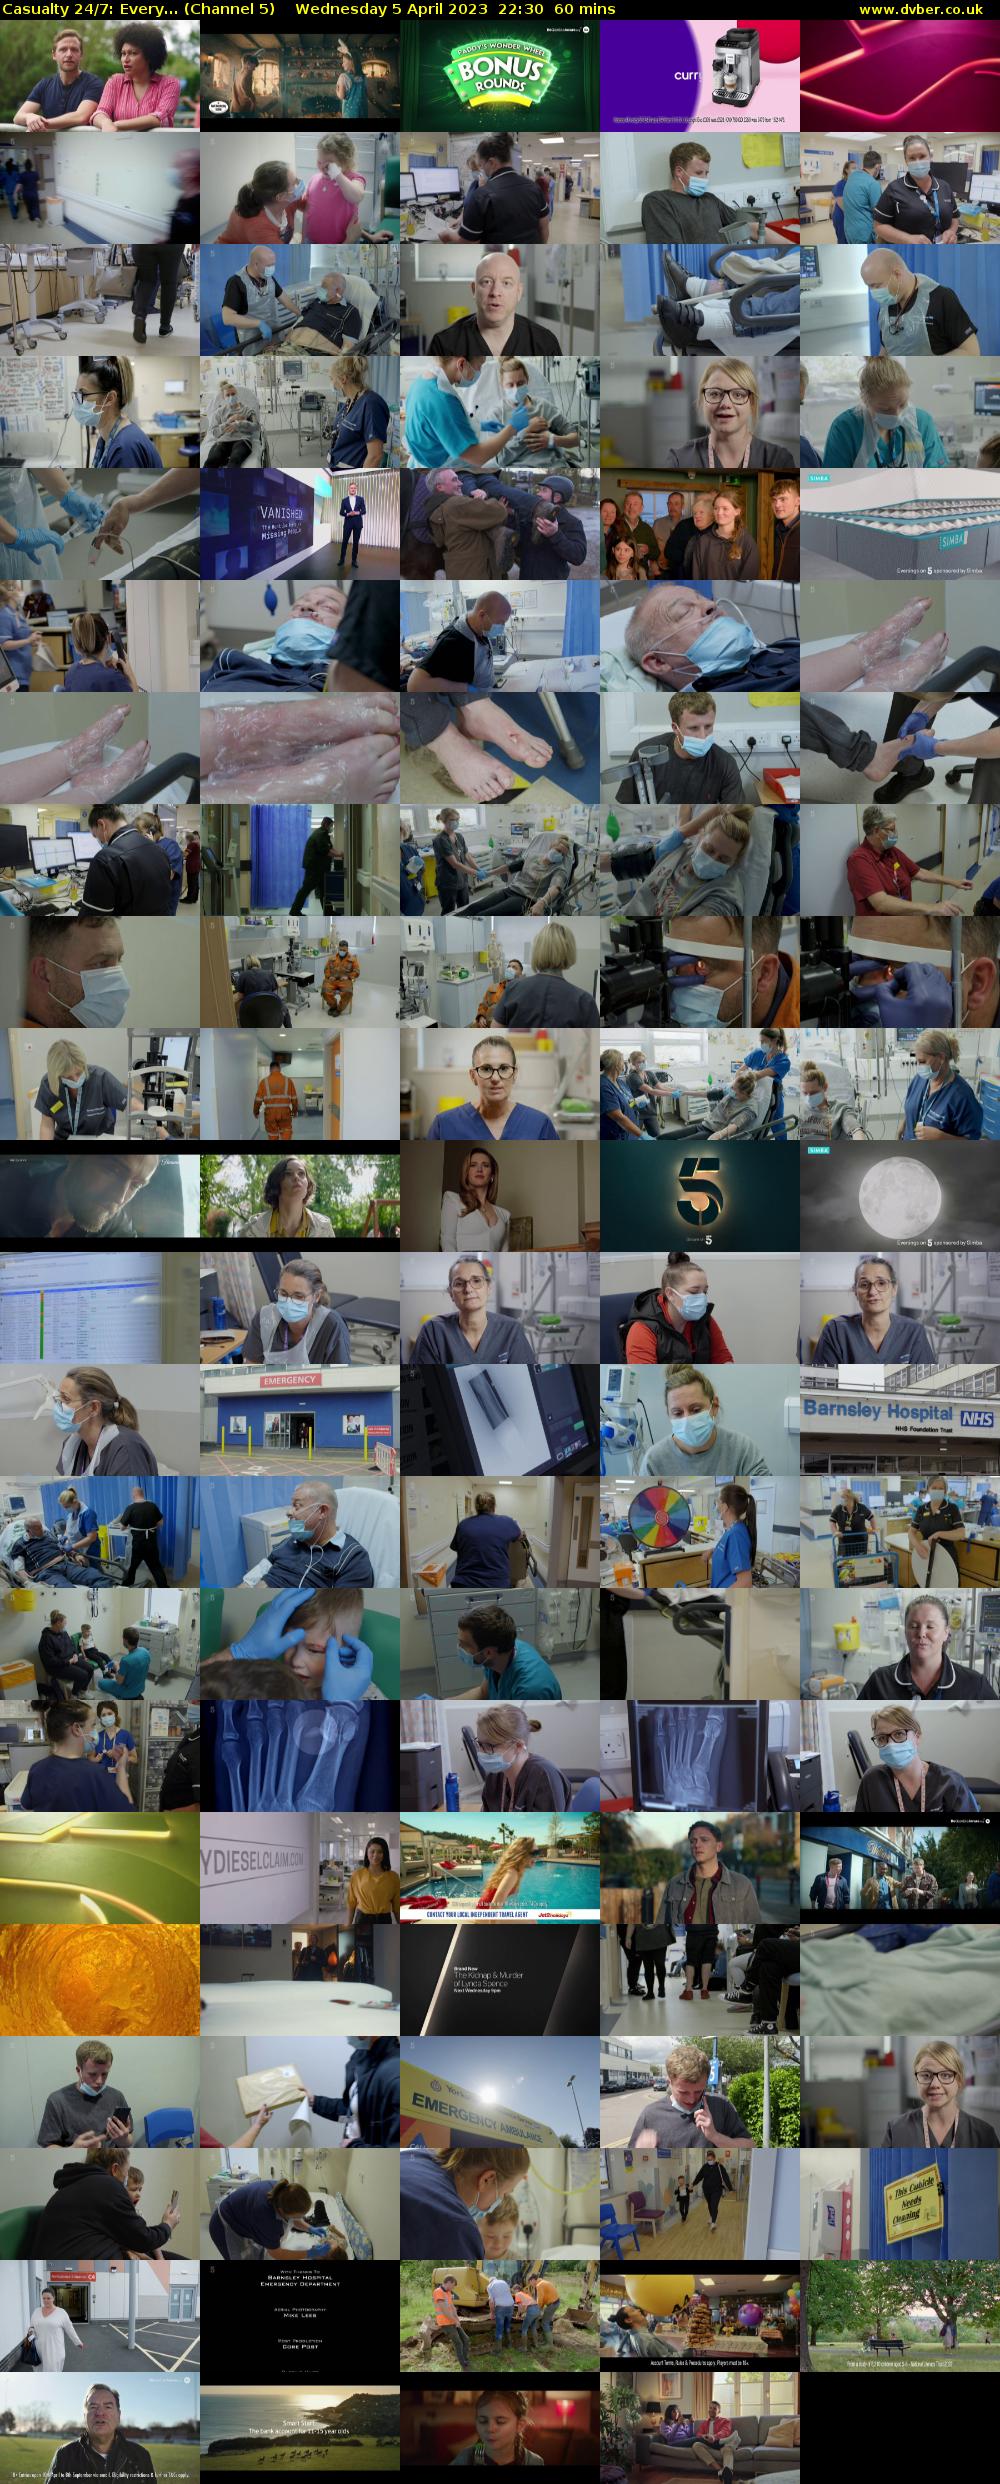 Casualty 24/7: Every... (Channel 5) Wednesday 5 April 2023 22:30 - 23:30